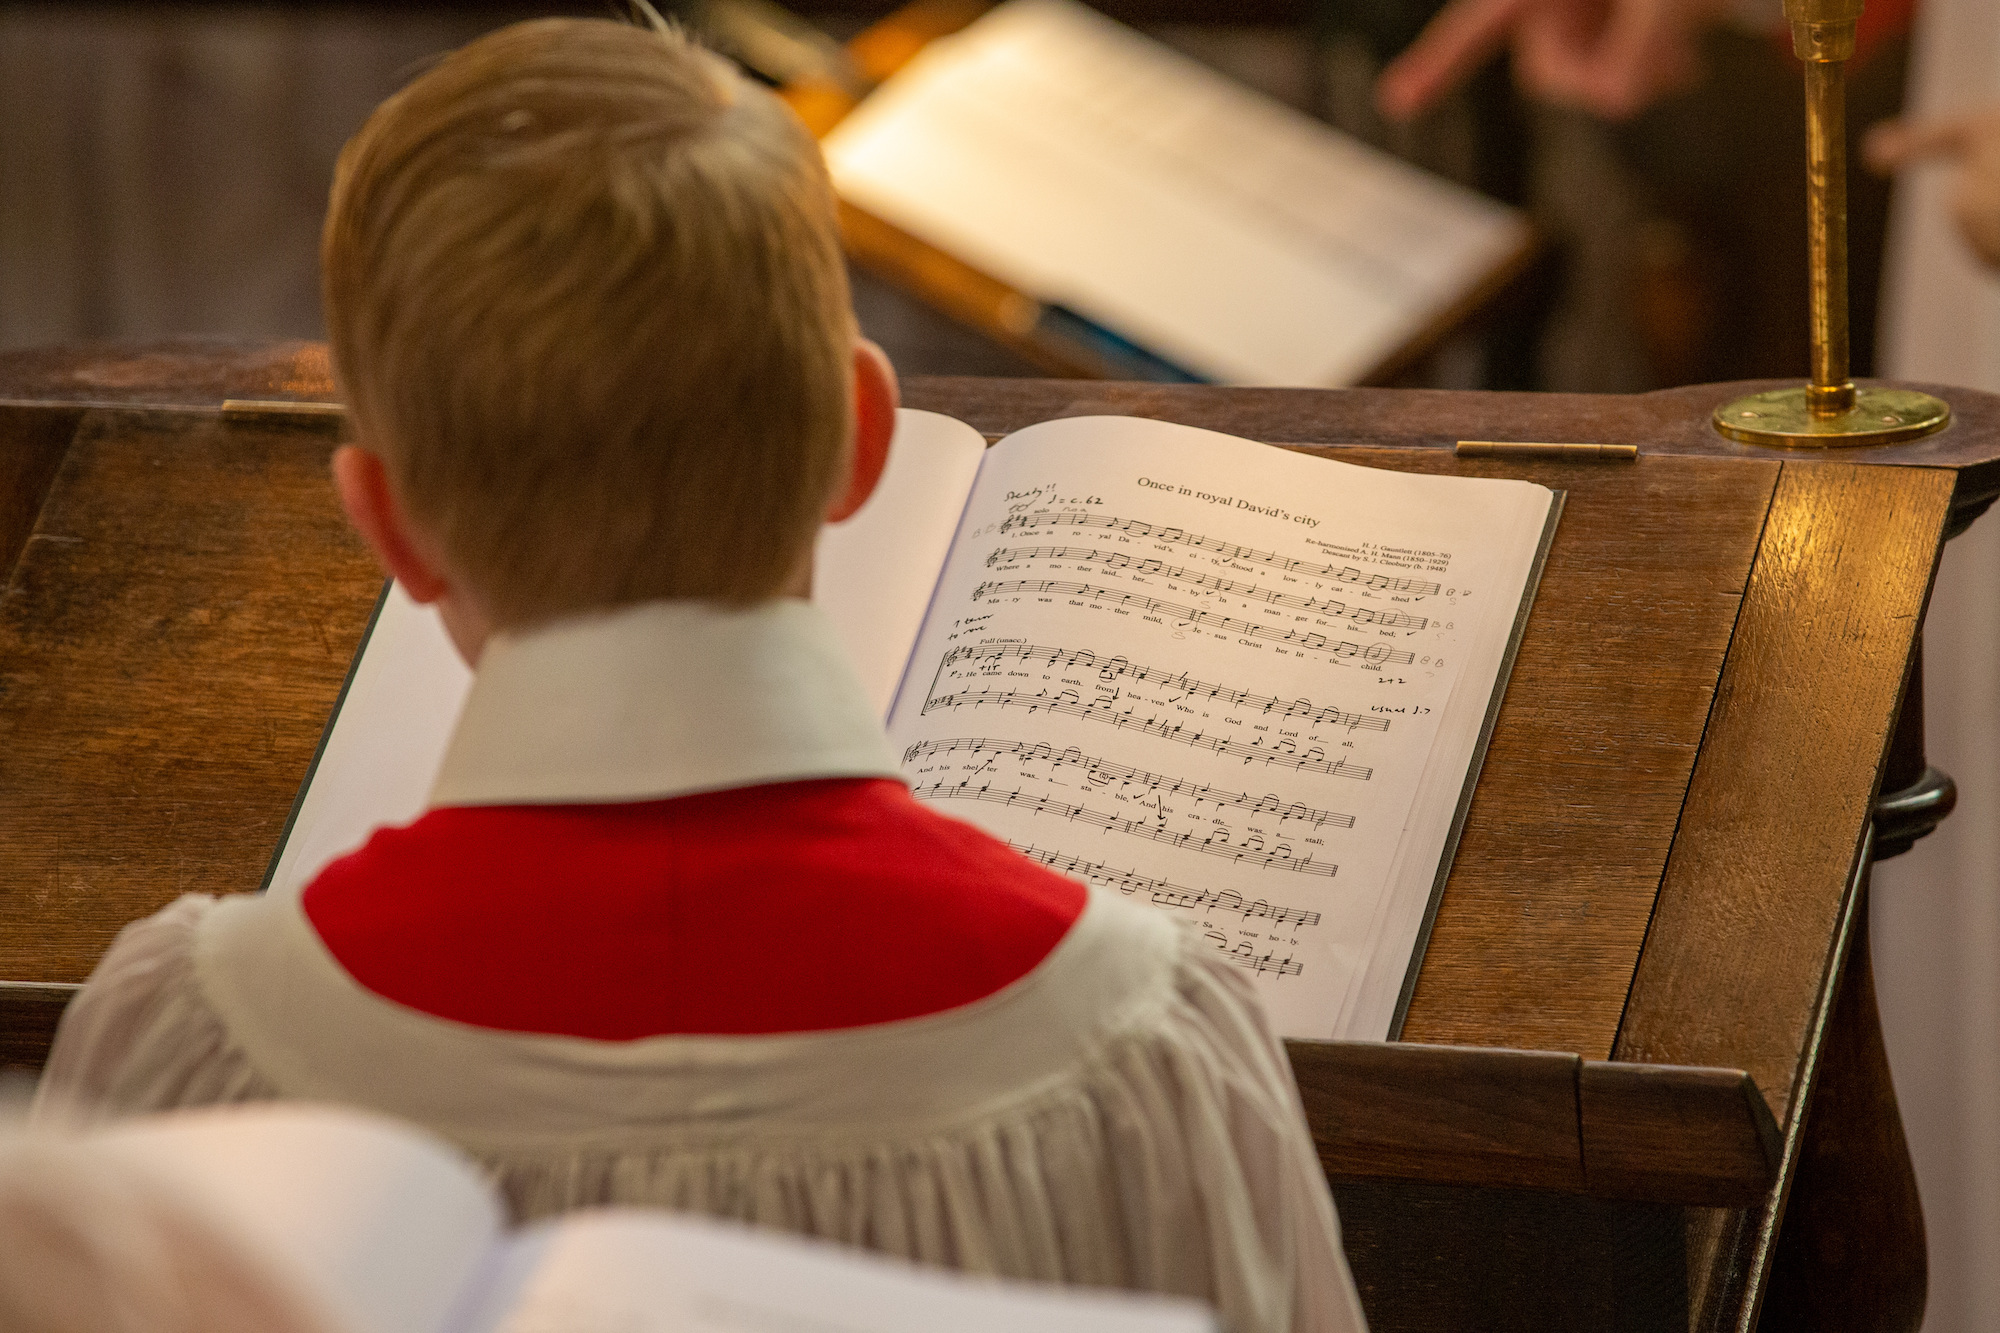 A chorister in front of his music